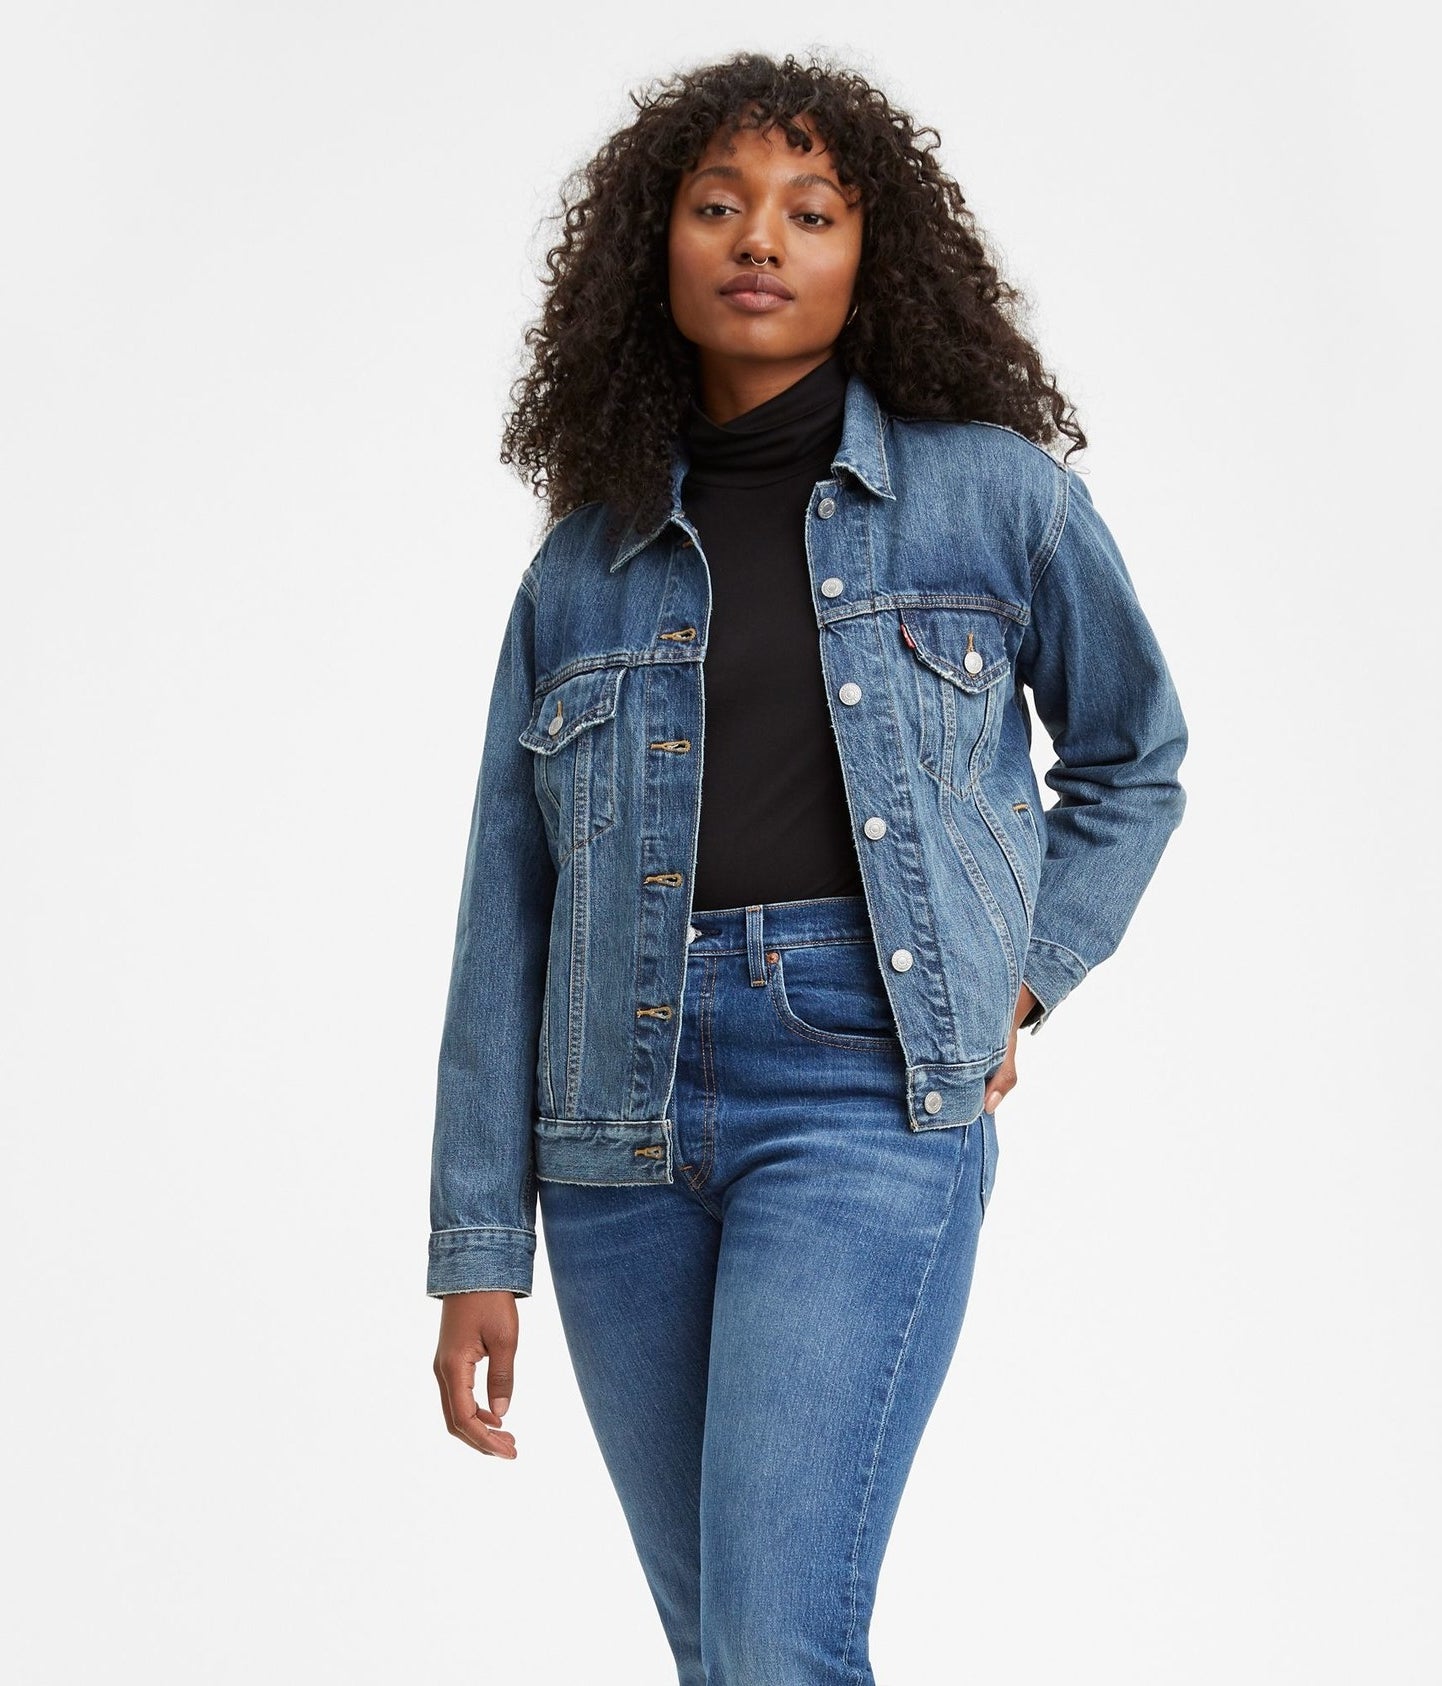 Model wearing the jacket with jeans and a black top